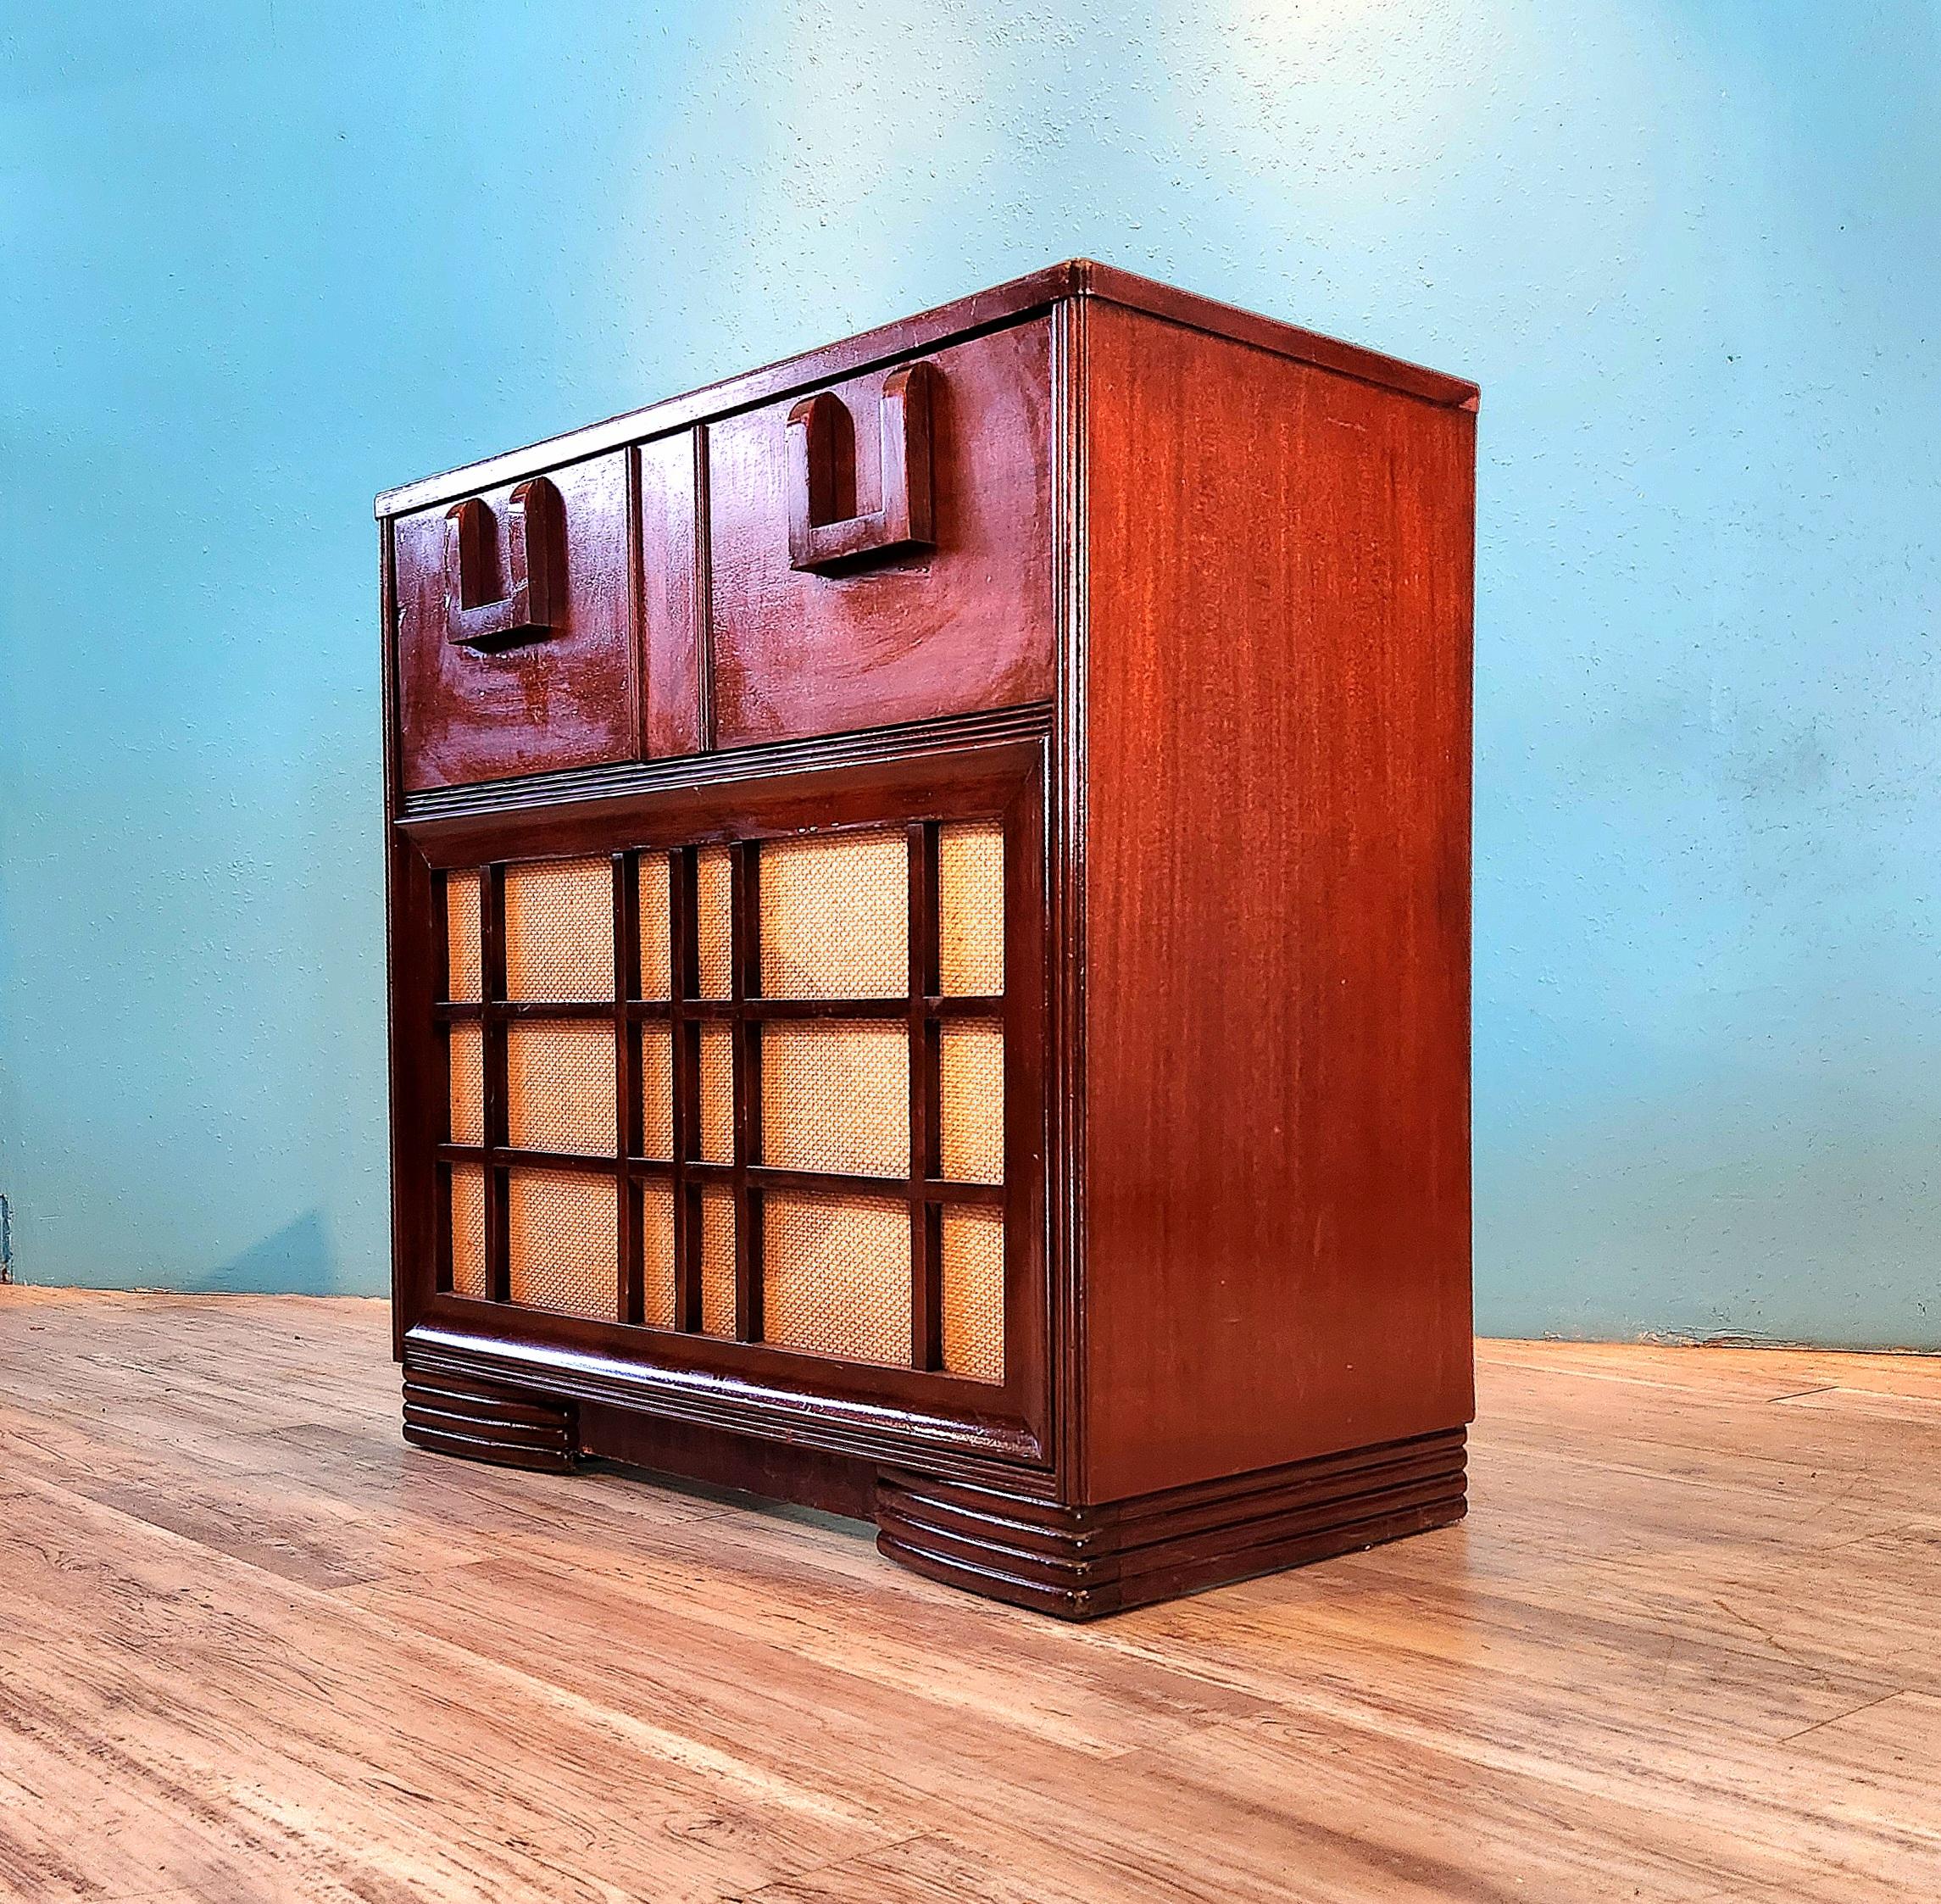 “If art decorates space… and music is the art that decorates time, then our vintage stereo consoles decorate lives by accentuating both.”

This console:
This is a console refurbished by us.  We acquire our pieces from very reliable, established, and